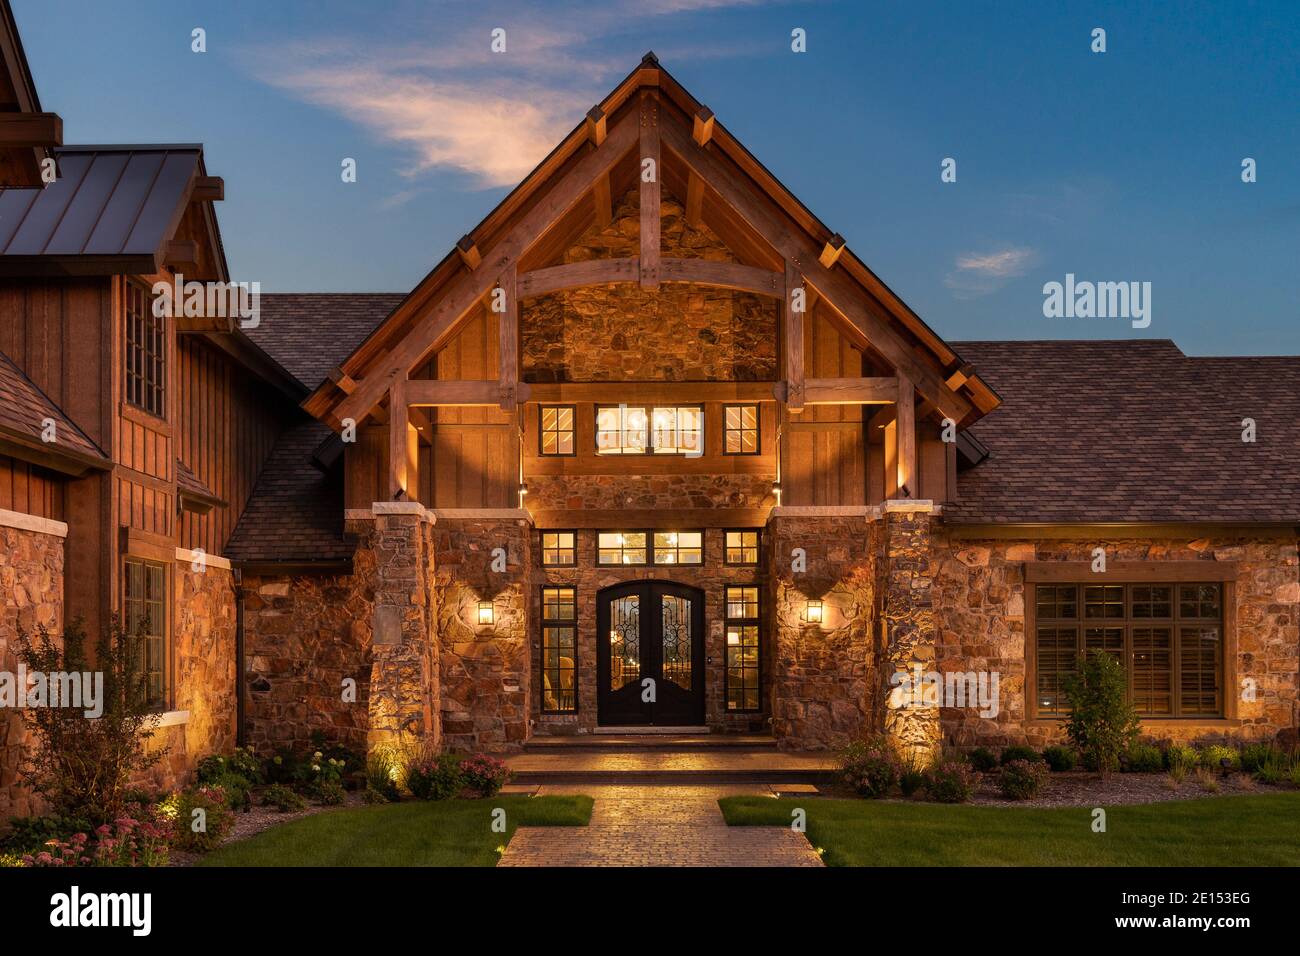 A luxury home with a fancy iron door, surrounded by windows and a rock exterior. Warm bulbs light the outside and inside of the property at sunset. Stock Photo